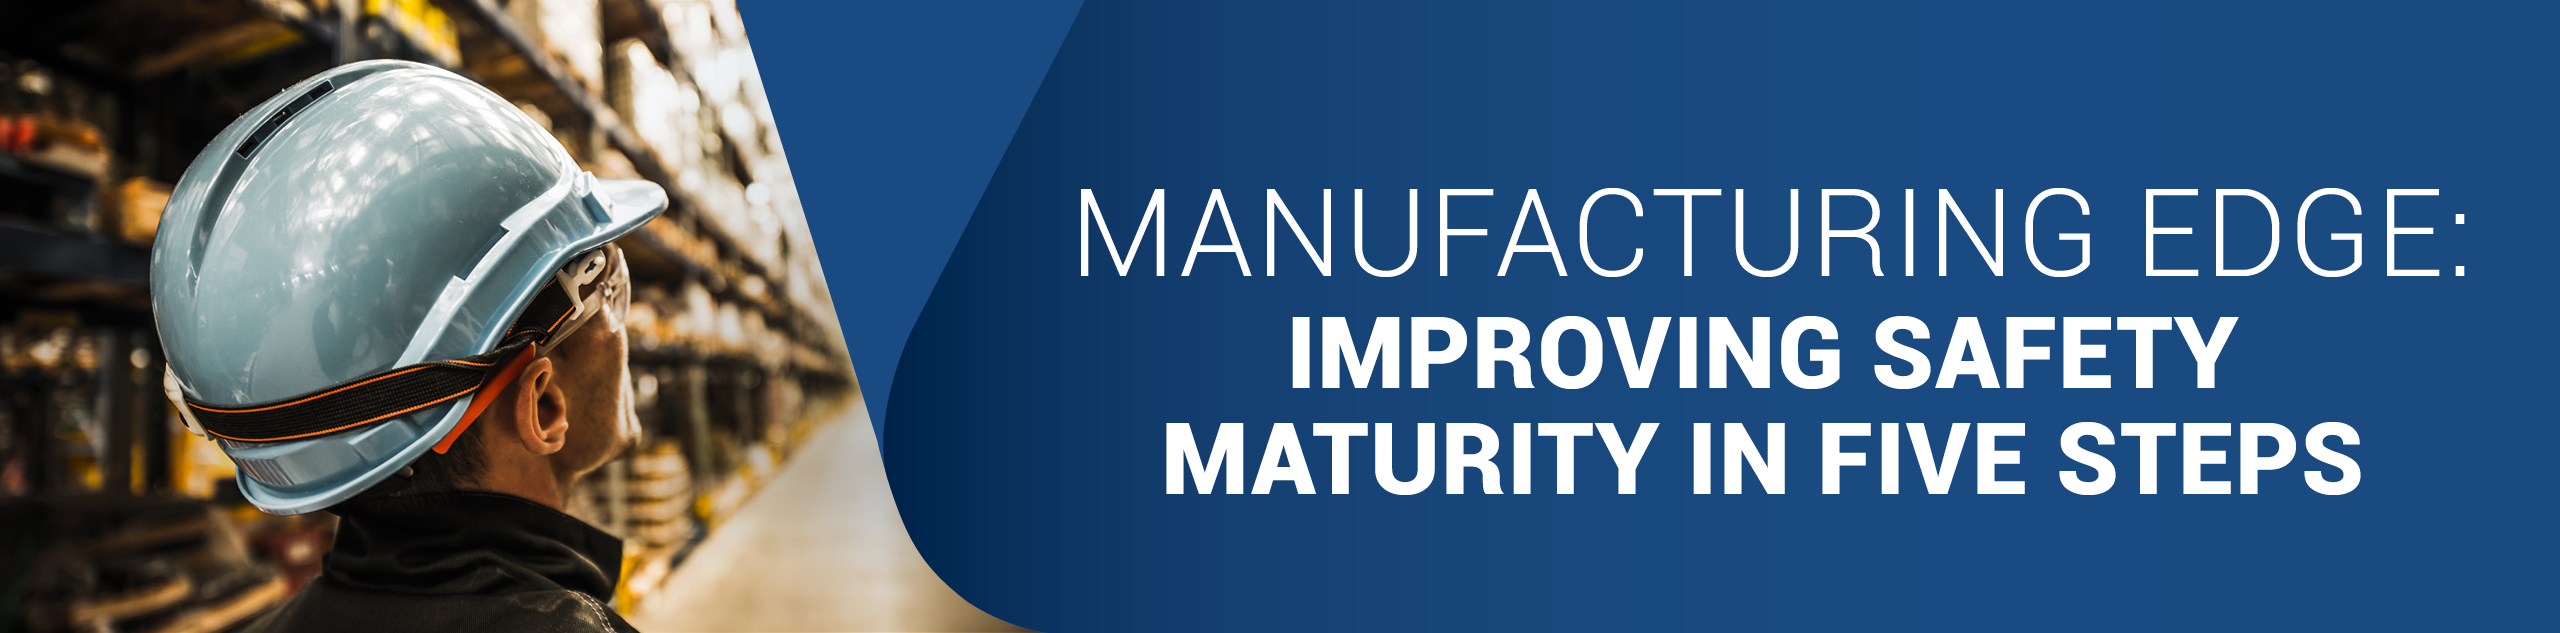 Improving Safety Maturity in Five Steps